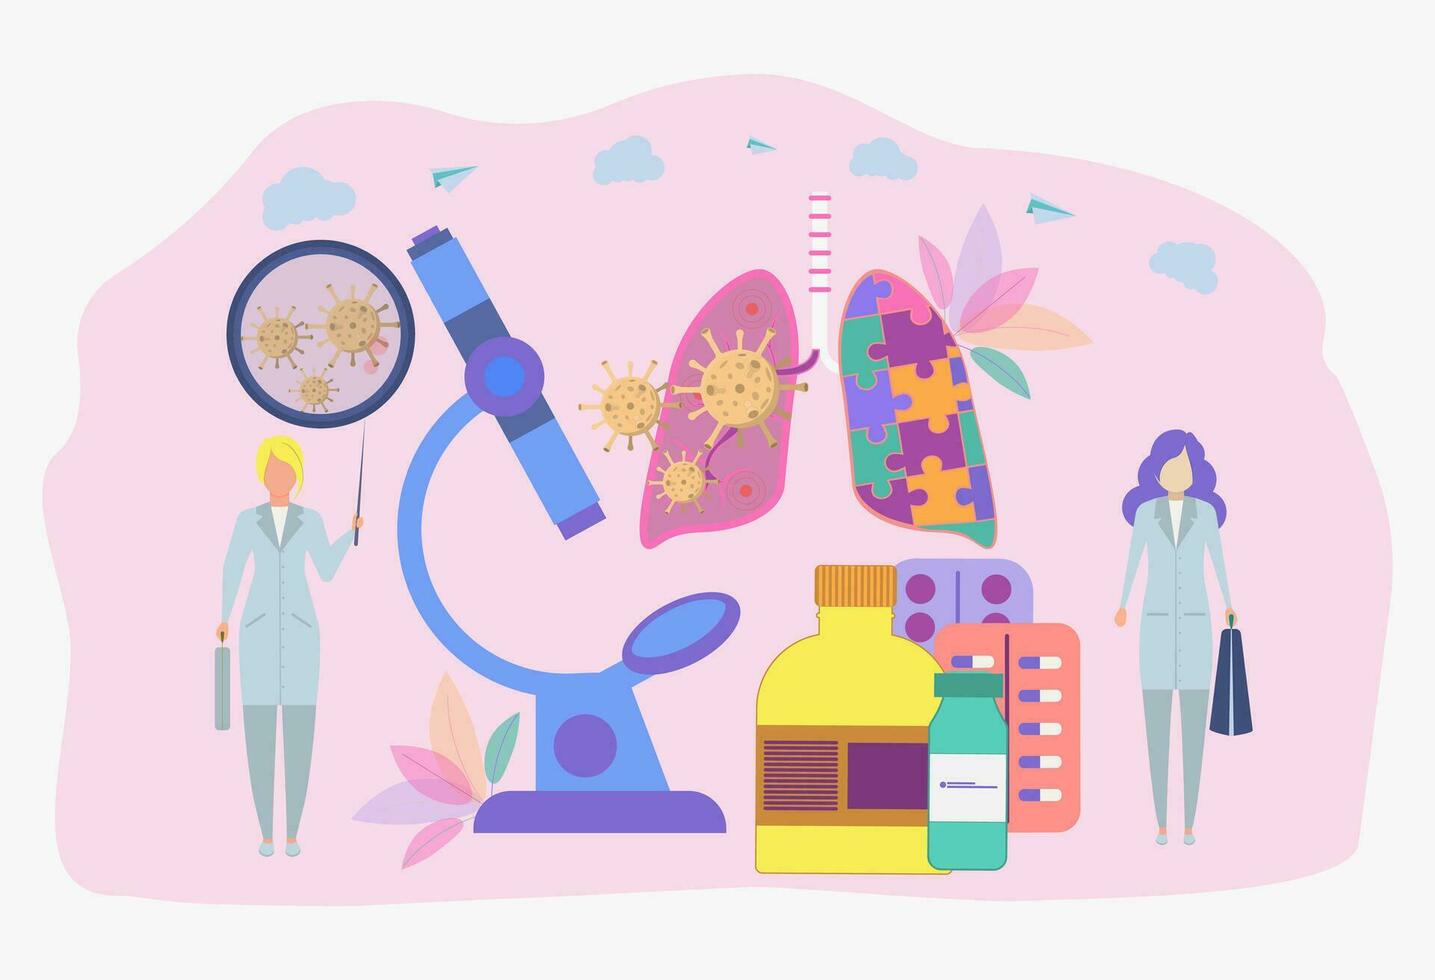 Infected planet. The concept of diagnosis and treatment of coronavirus COVID-2019. Doctors diagnose the deadly type of 2019 nKoV virus. Little scientists study the virus. Colorful vector illustration.